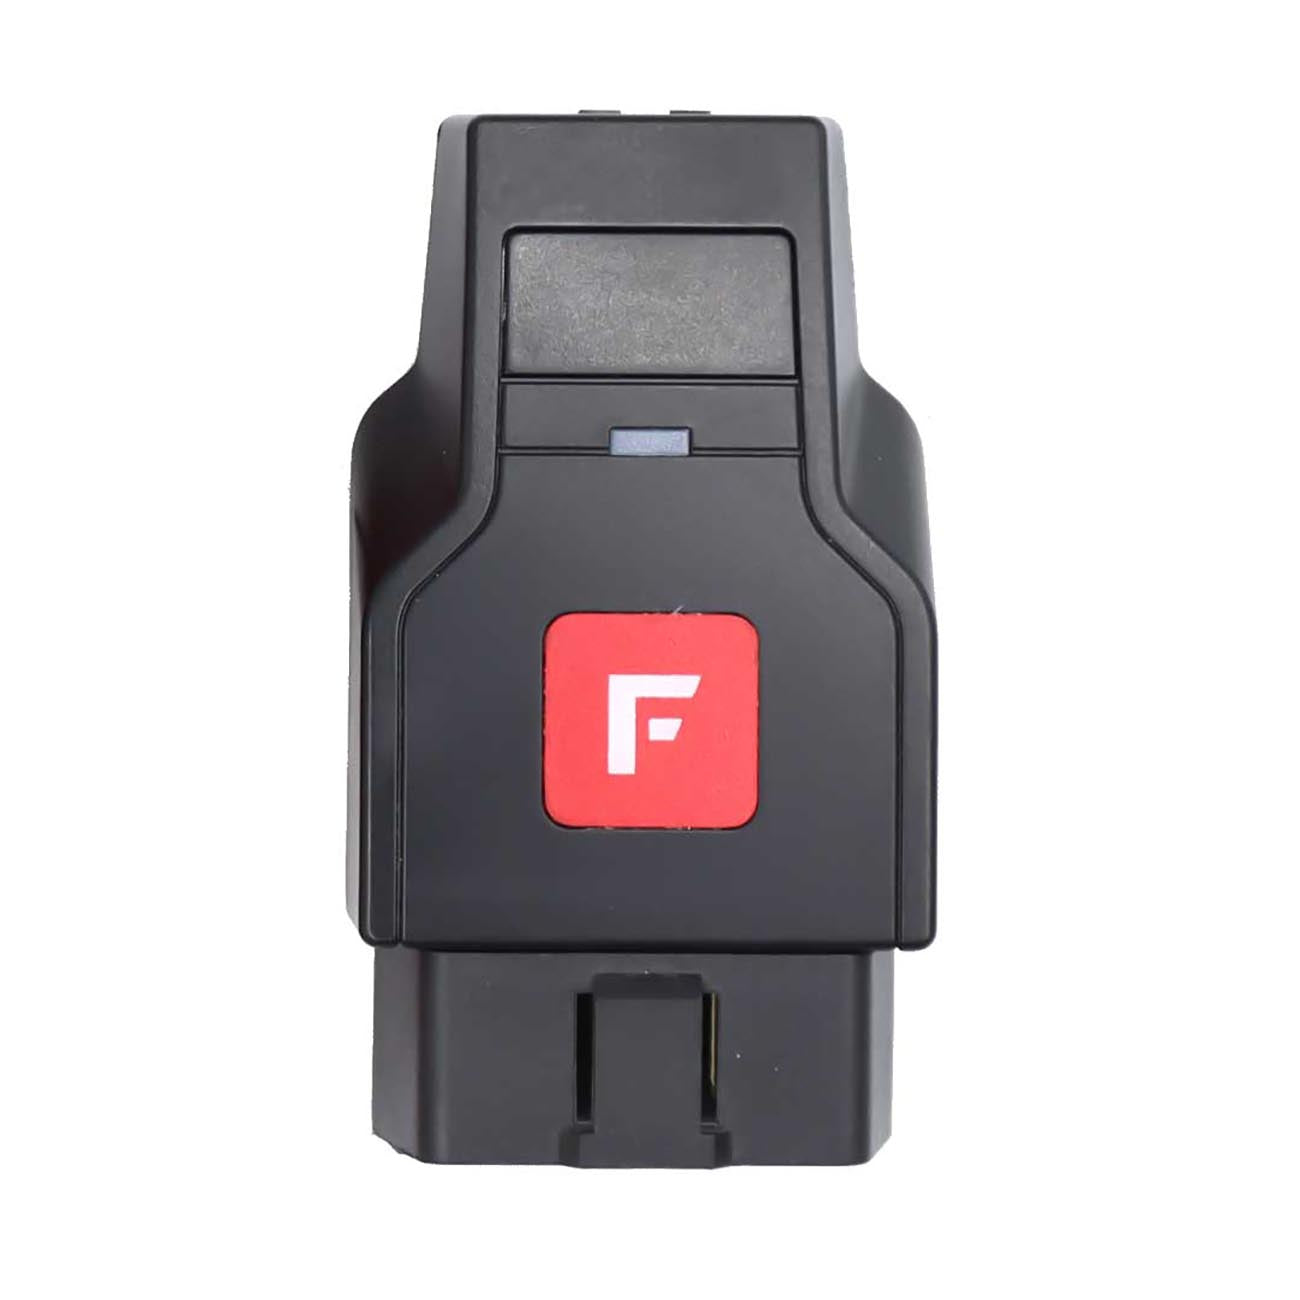 Fortin FLASHLINKMOBILE Bluetooth Firmware Update Module for iOS and Android Platforms